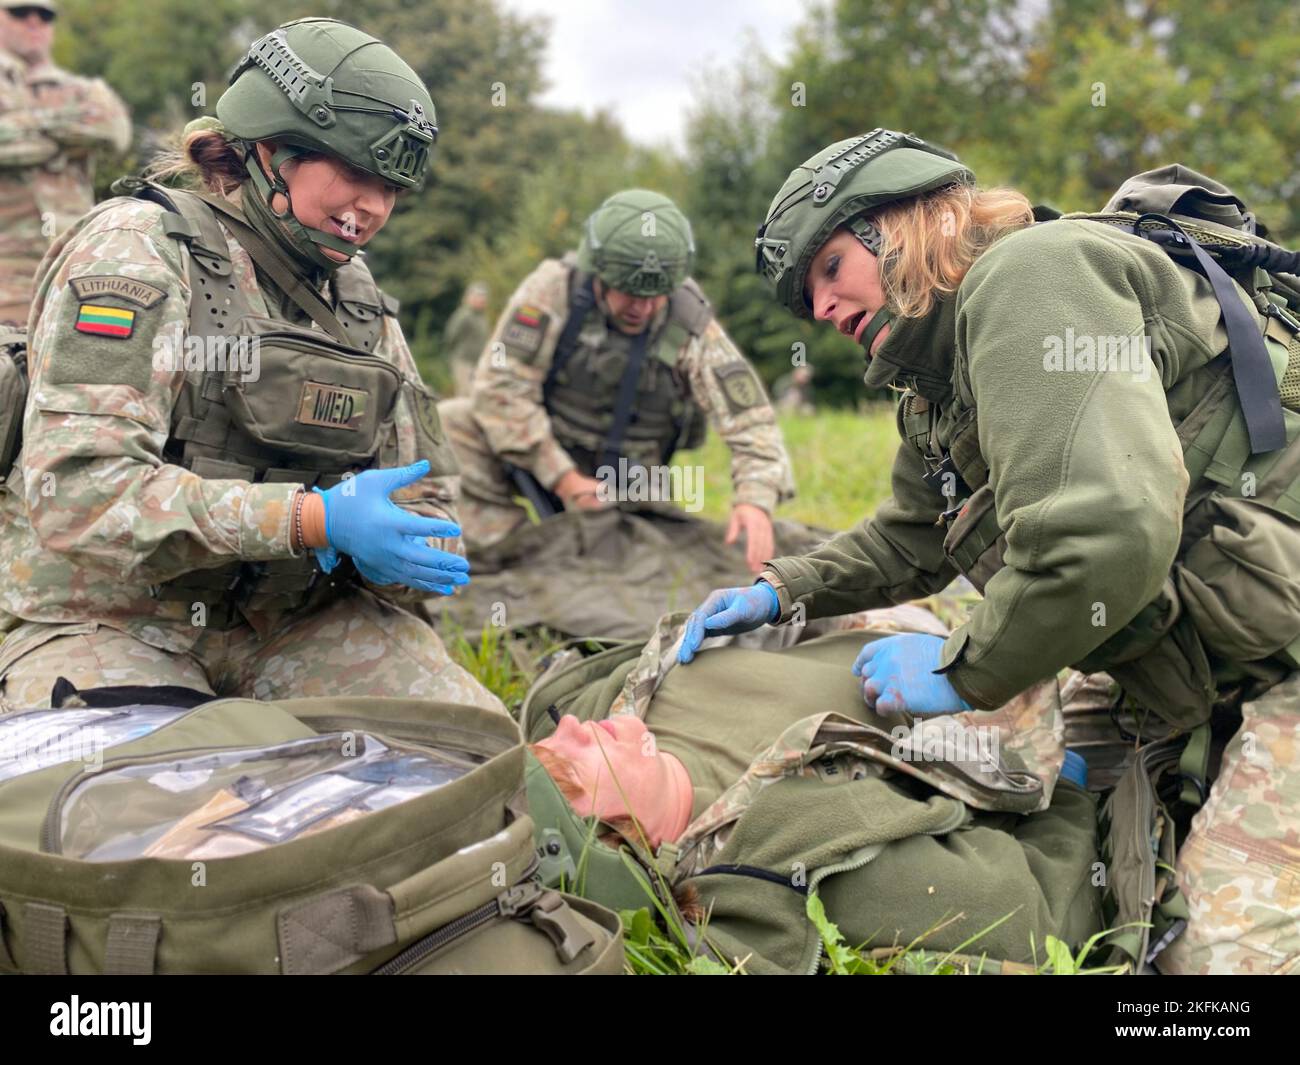 Lithuanian nurses Karile Vasilianuskiene and Staff Sgt. Adrone Vasiliauskaite practice tactical field care on a simulated casualty during a trauma lane in Kaunas, Lithuania, 22 September, 2022. Stock Photo